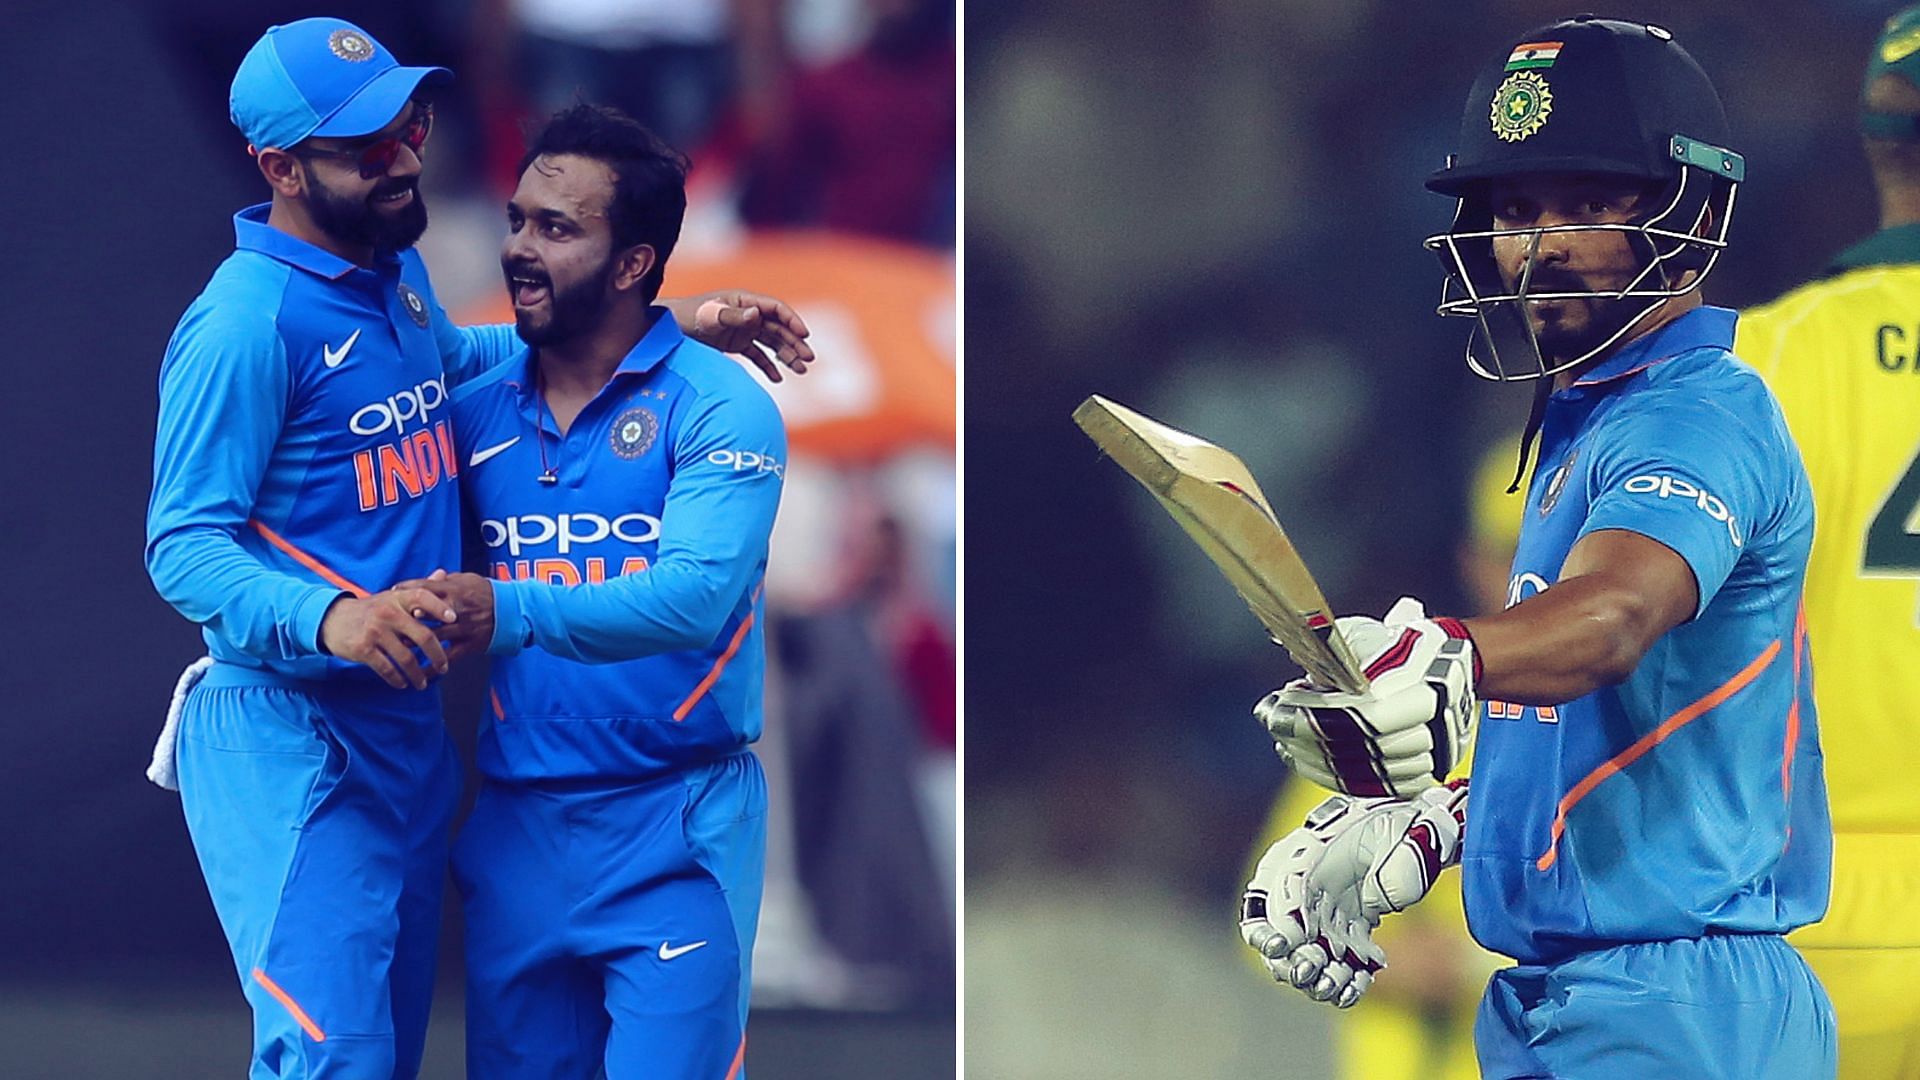 Kedar Jadhav starred with ball and bat during India’s win in the first ODI against Australia at Hyderabad.